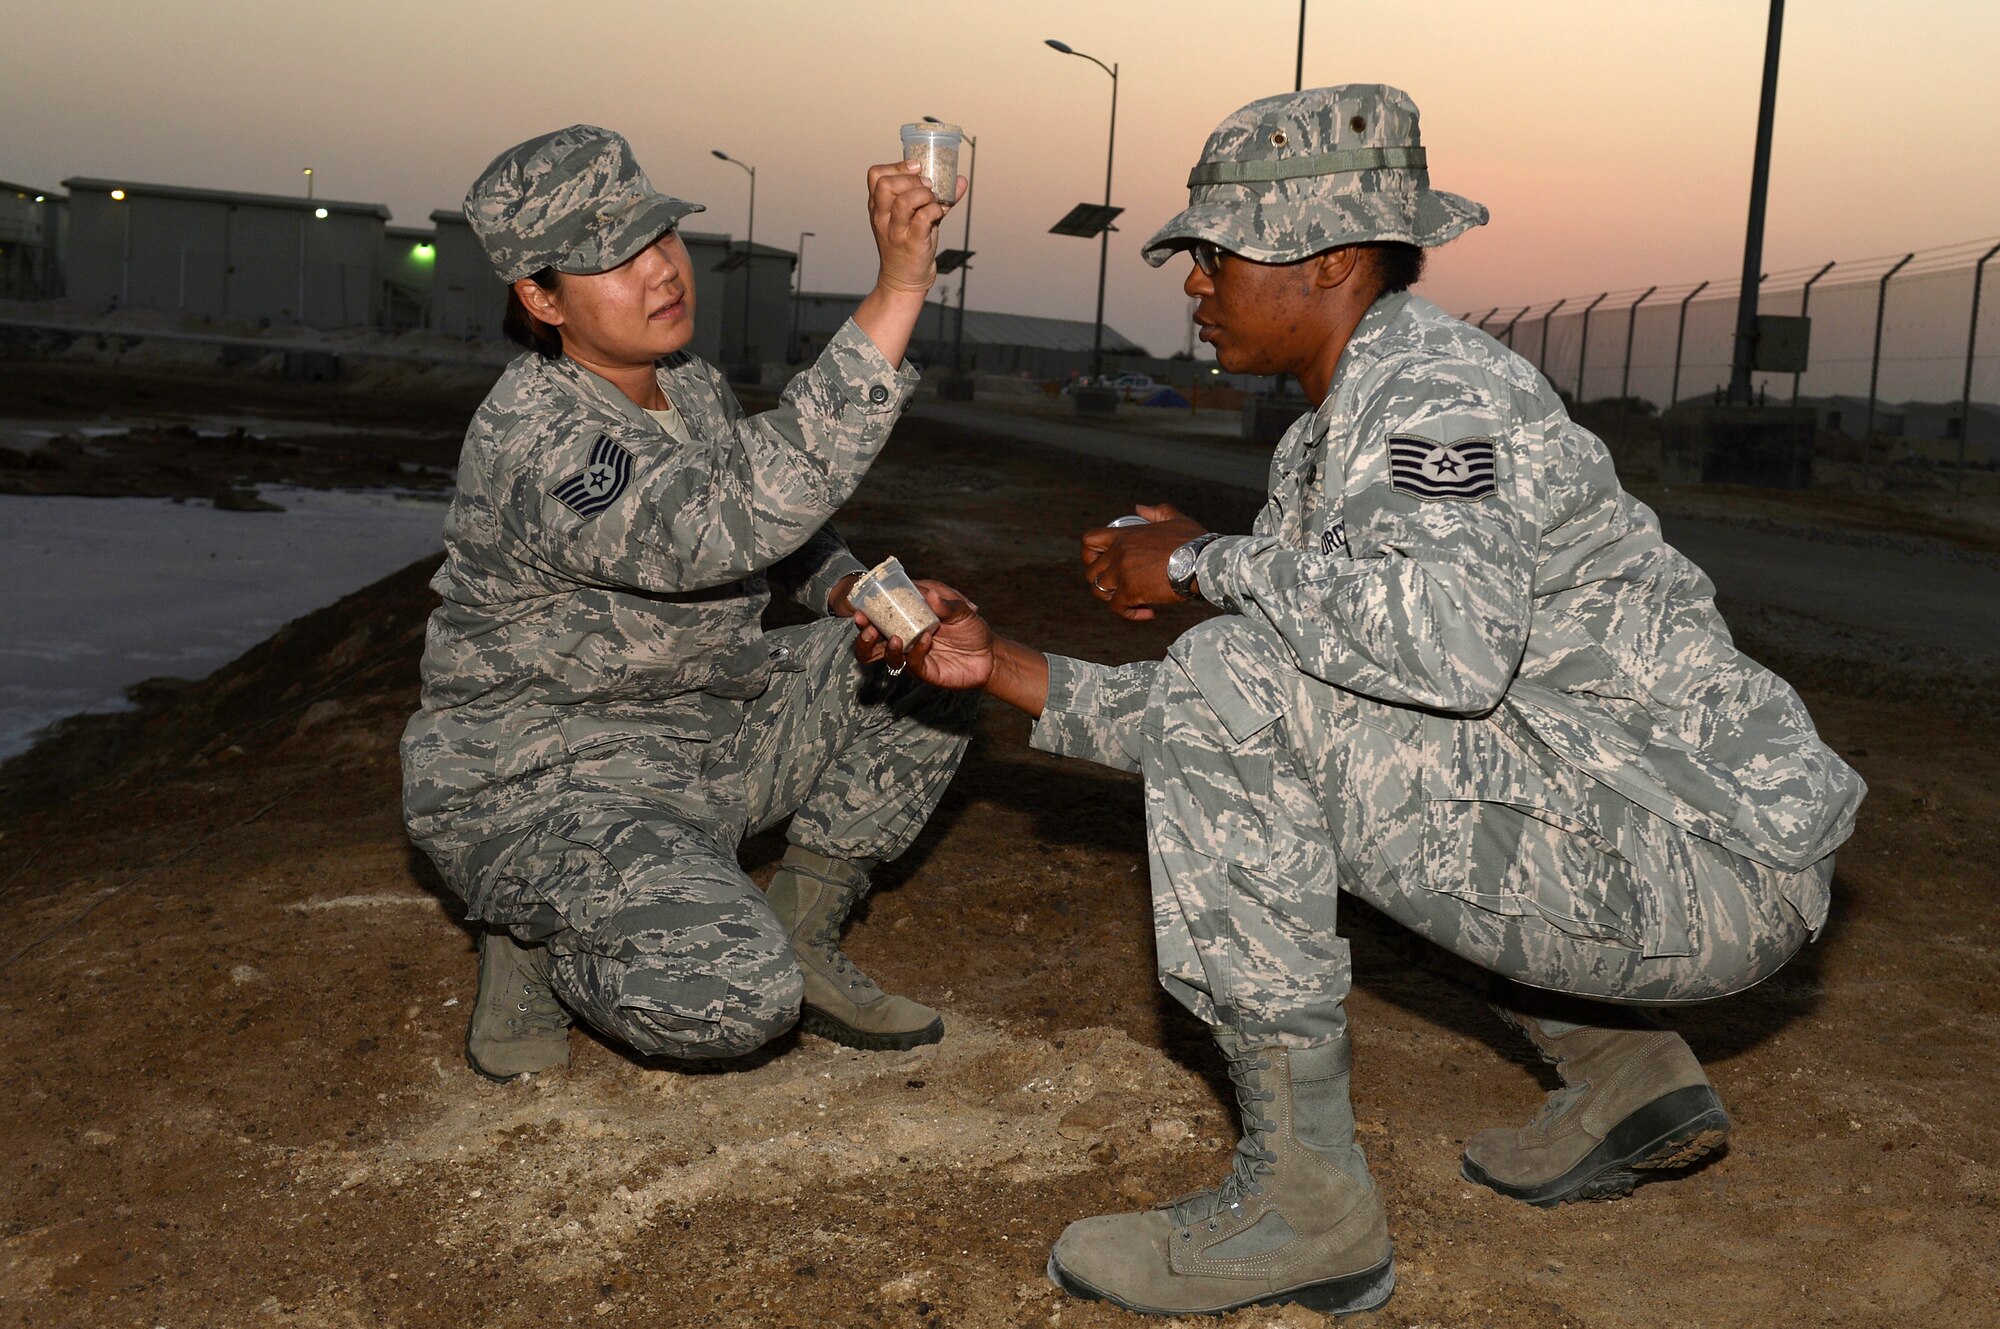 Tech. Sgt. Jenn, left, public health technician, and Tech. Sgt. Margaret, bioenvironmental engineering NCO in-charge, collect soil samples at an undisclosed location in Southwest Asia Dec. 24, 2014. Members of public health and bioenvironmental engineering make up the Preventive Medicine clinic, which are committed to keeping every Airman free of illness and injury. Jenn is currently deployed from Offut Air Force Base, Neb., and is a native of Vallejo, Calif. Margaret is currently deployed from Nellis Air Force Base, Nev., and is a native of Chicago, Ill. (U.S. Air Force photo/Tech. Sgt. Marie Brown)